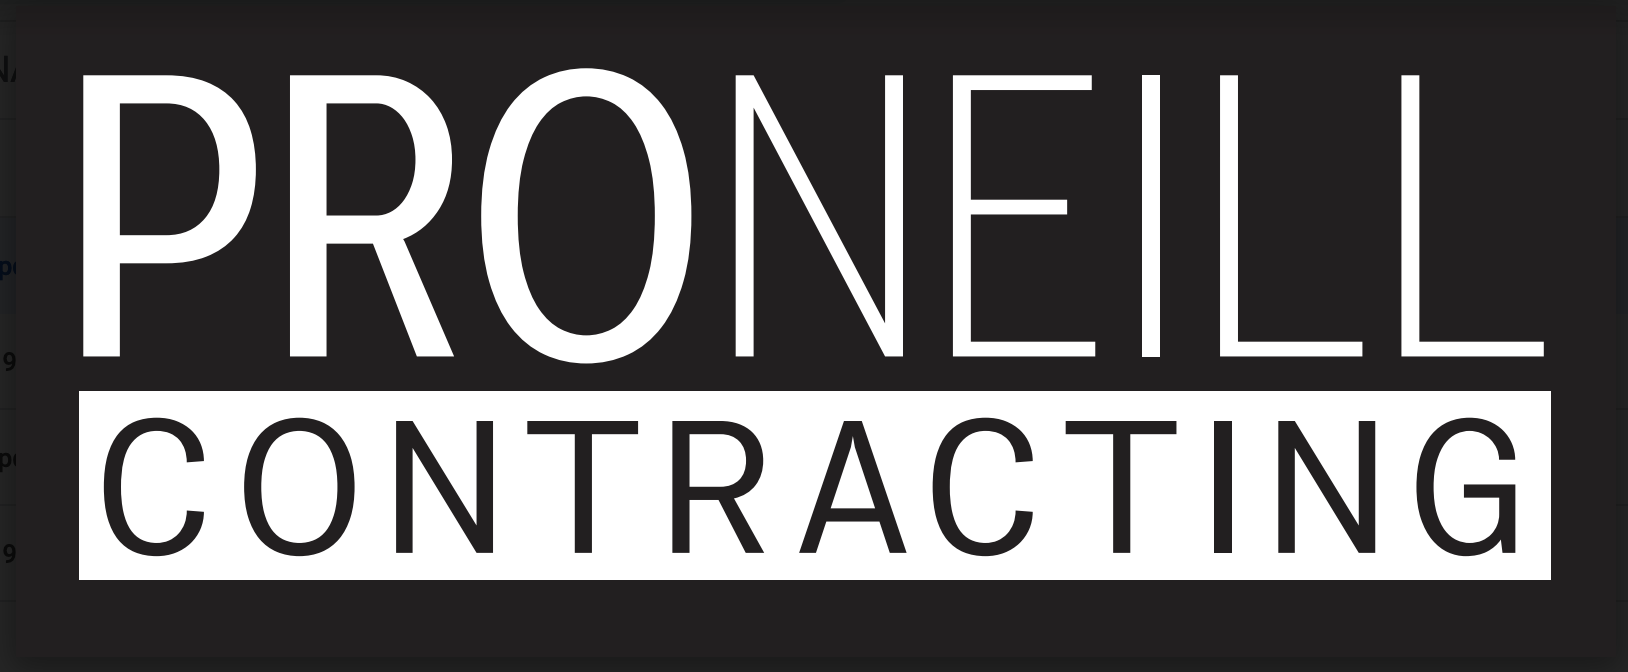 PRONIELL CONTRACTING